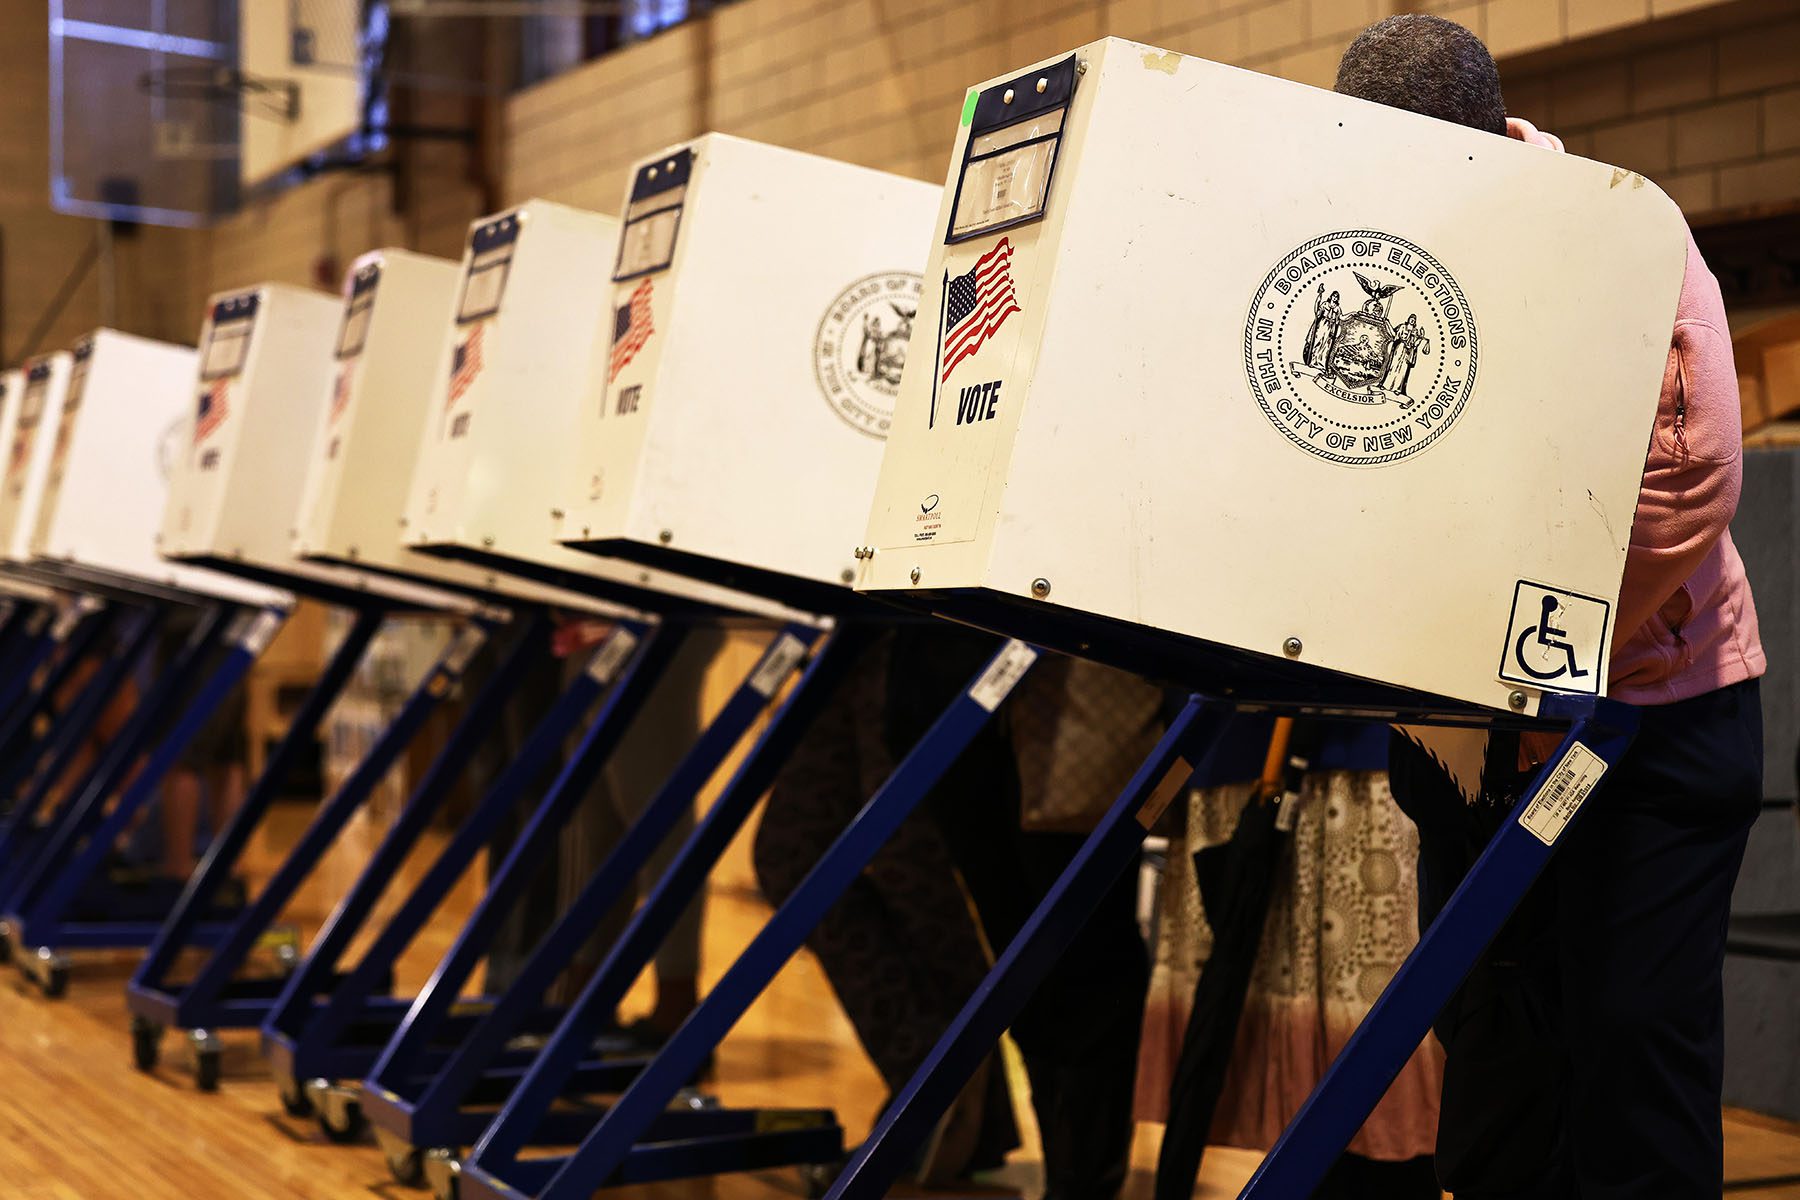 Voters stand behind covered ballot boxes while they vote.